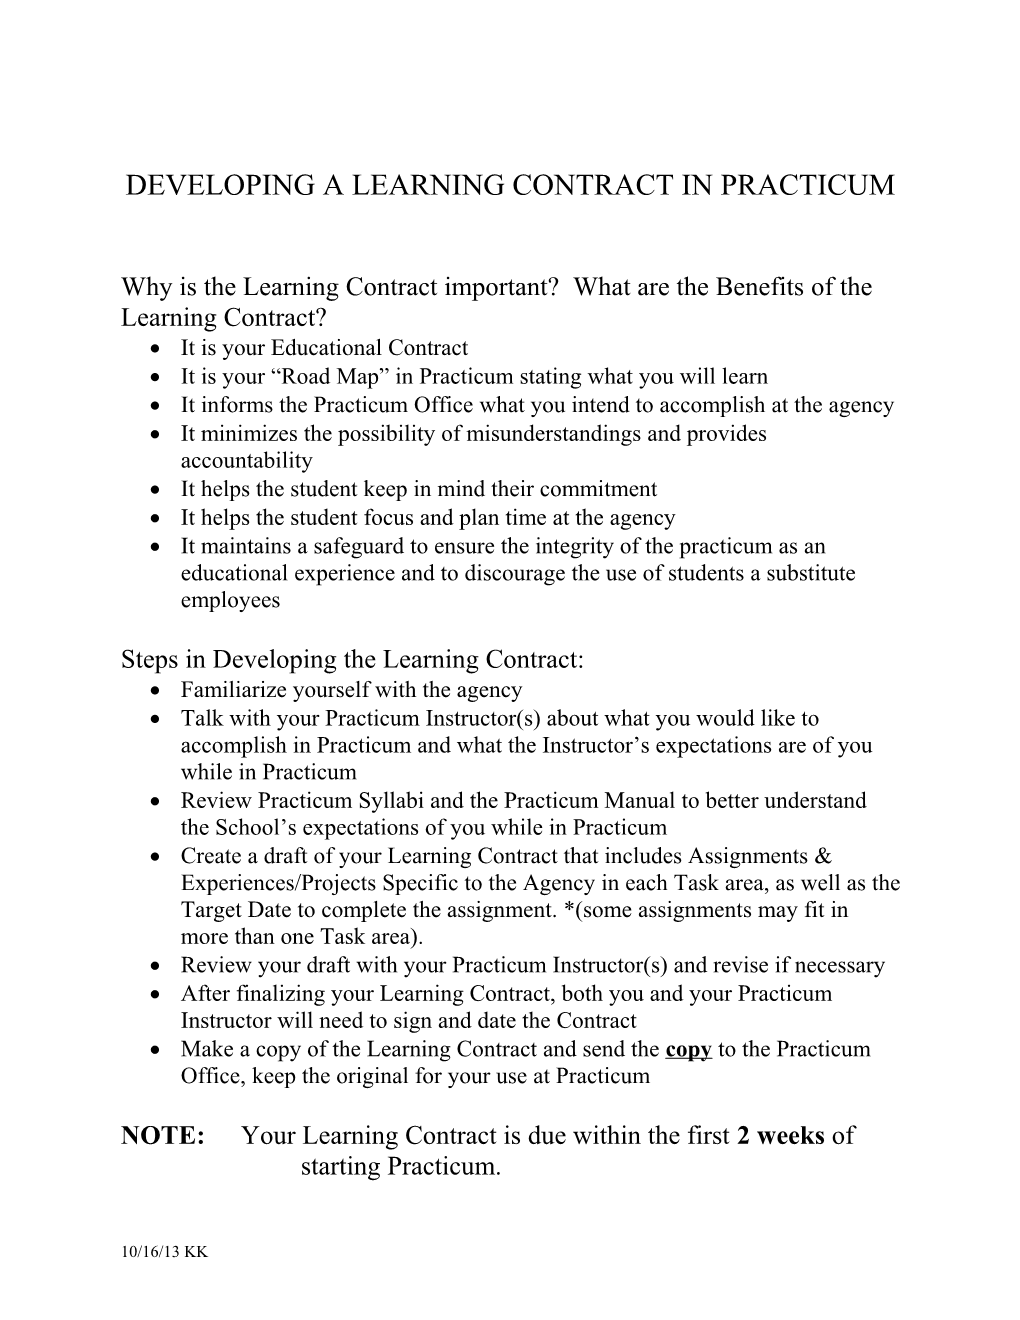 How to Develop the Learning Contract